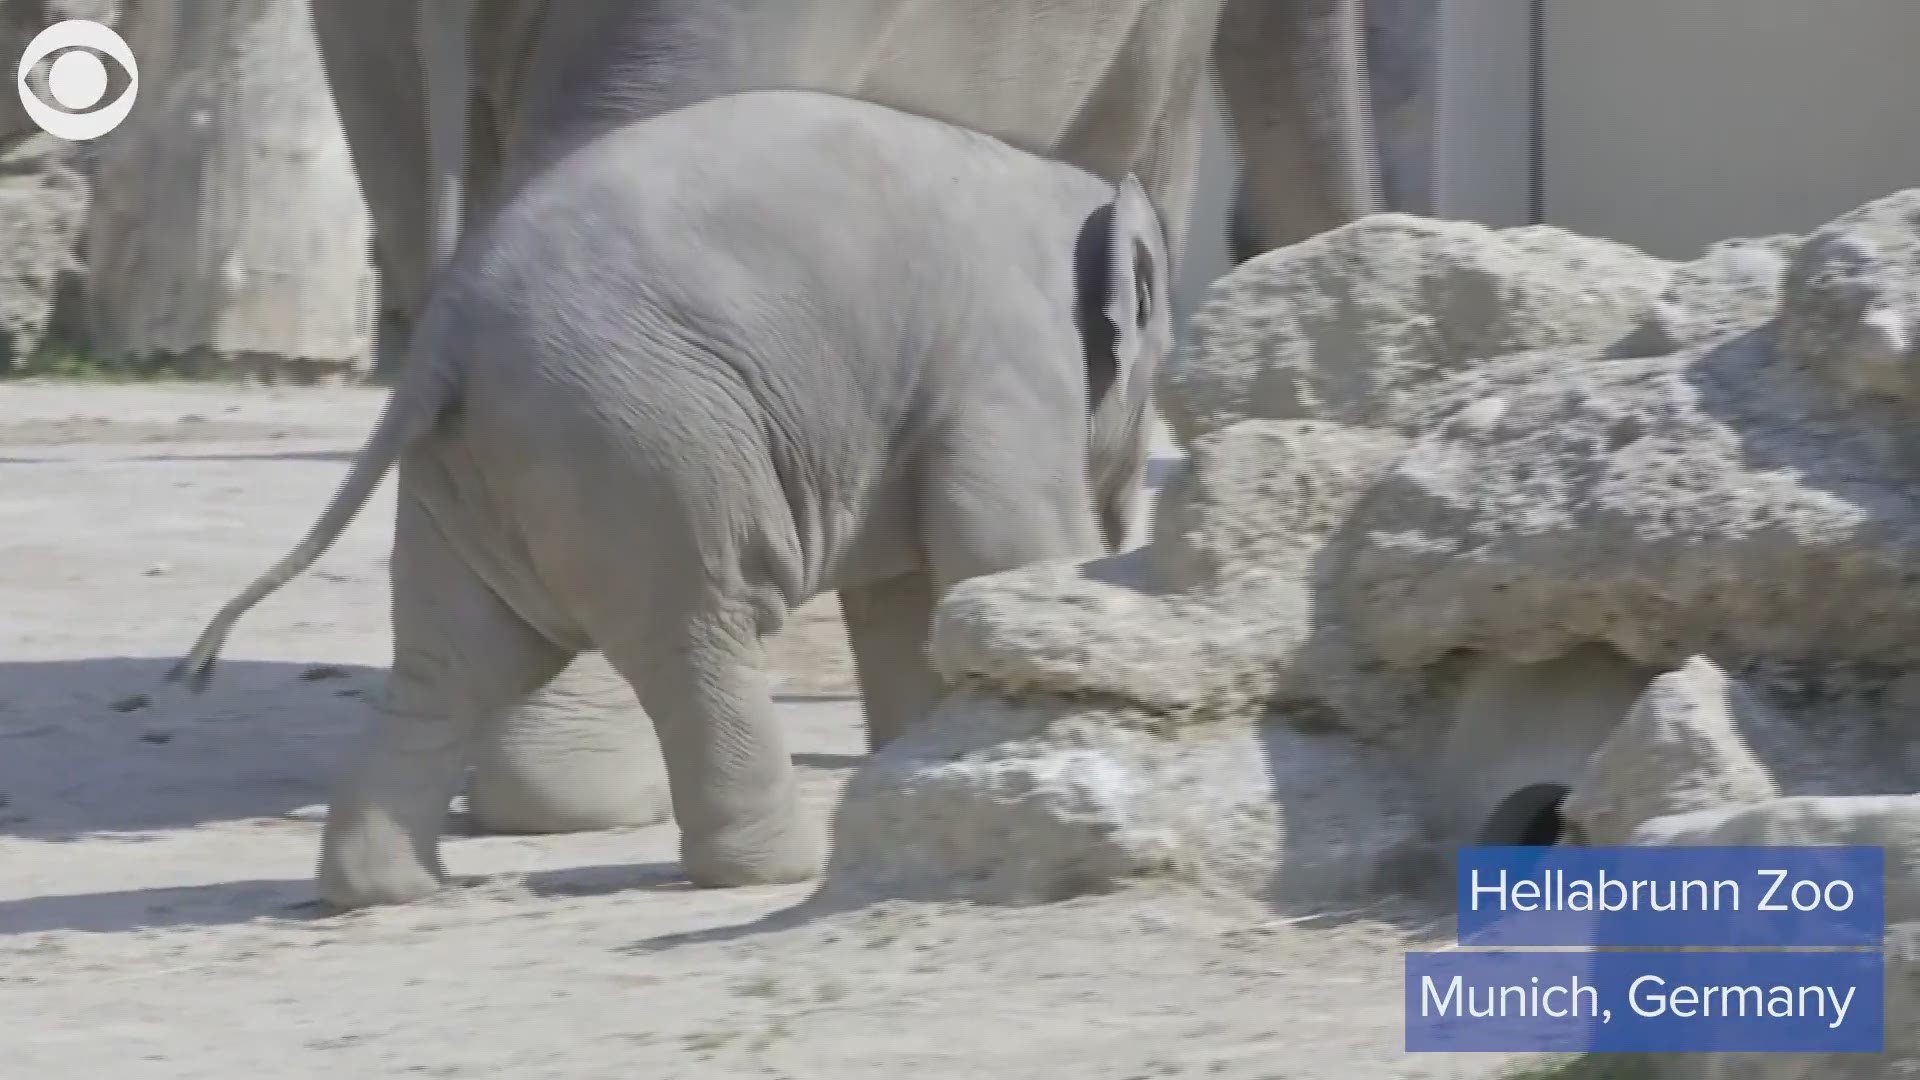 CUTE: Look at this baby elephant enjoying the spring weather at a zoo in Munich, Germany on Tuesday (4/27).